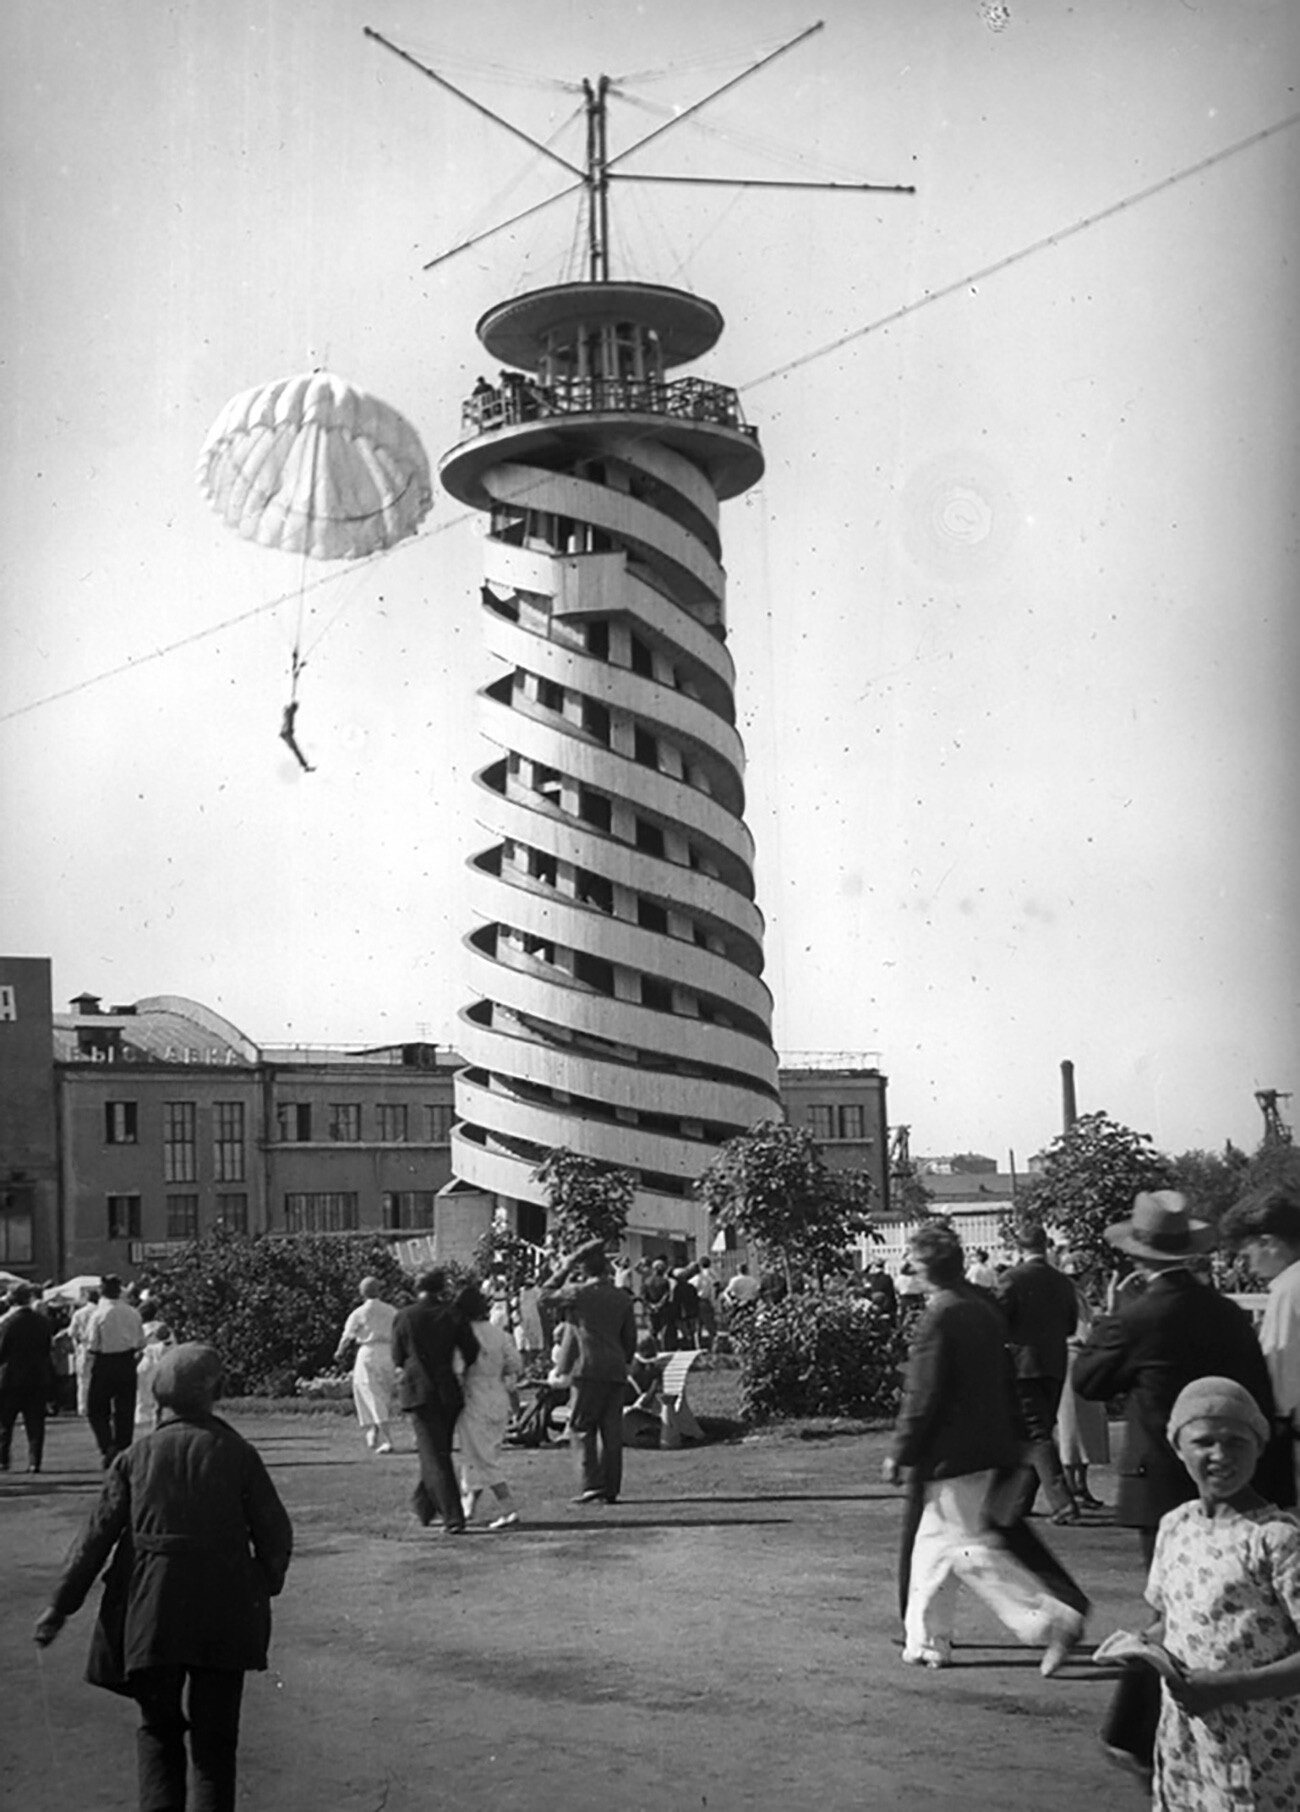 Parachute tower in Gorky Park, 1955